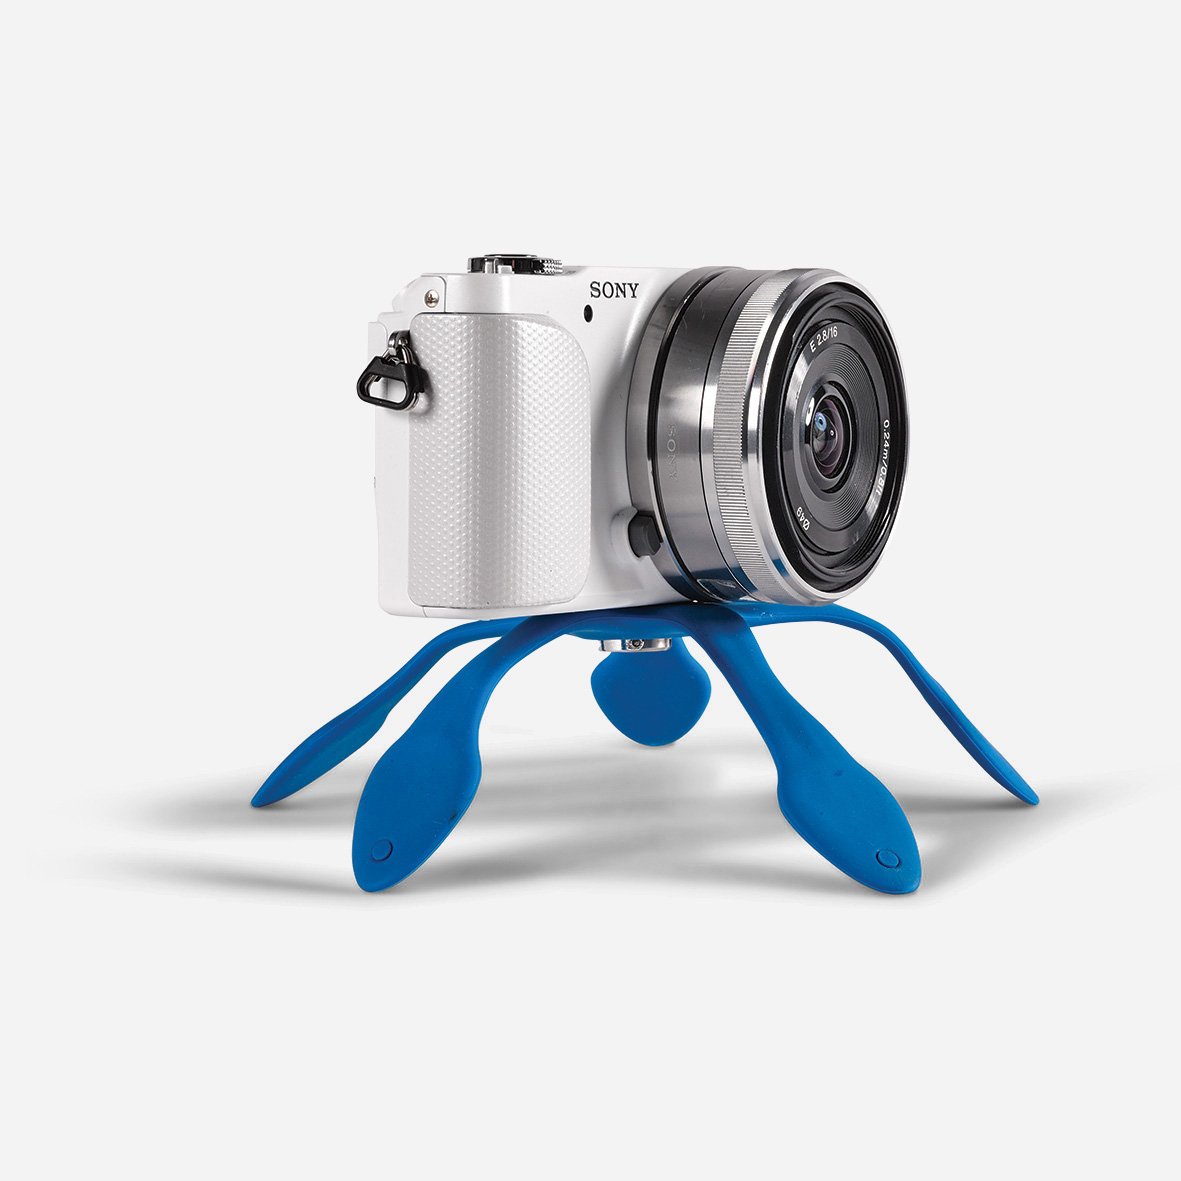 Splat Flexible Tripod for P&S and Mirrorless Cameras